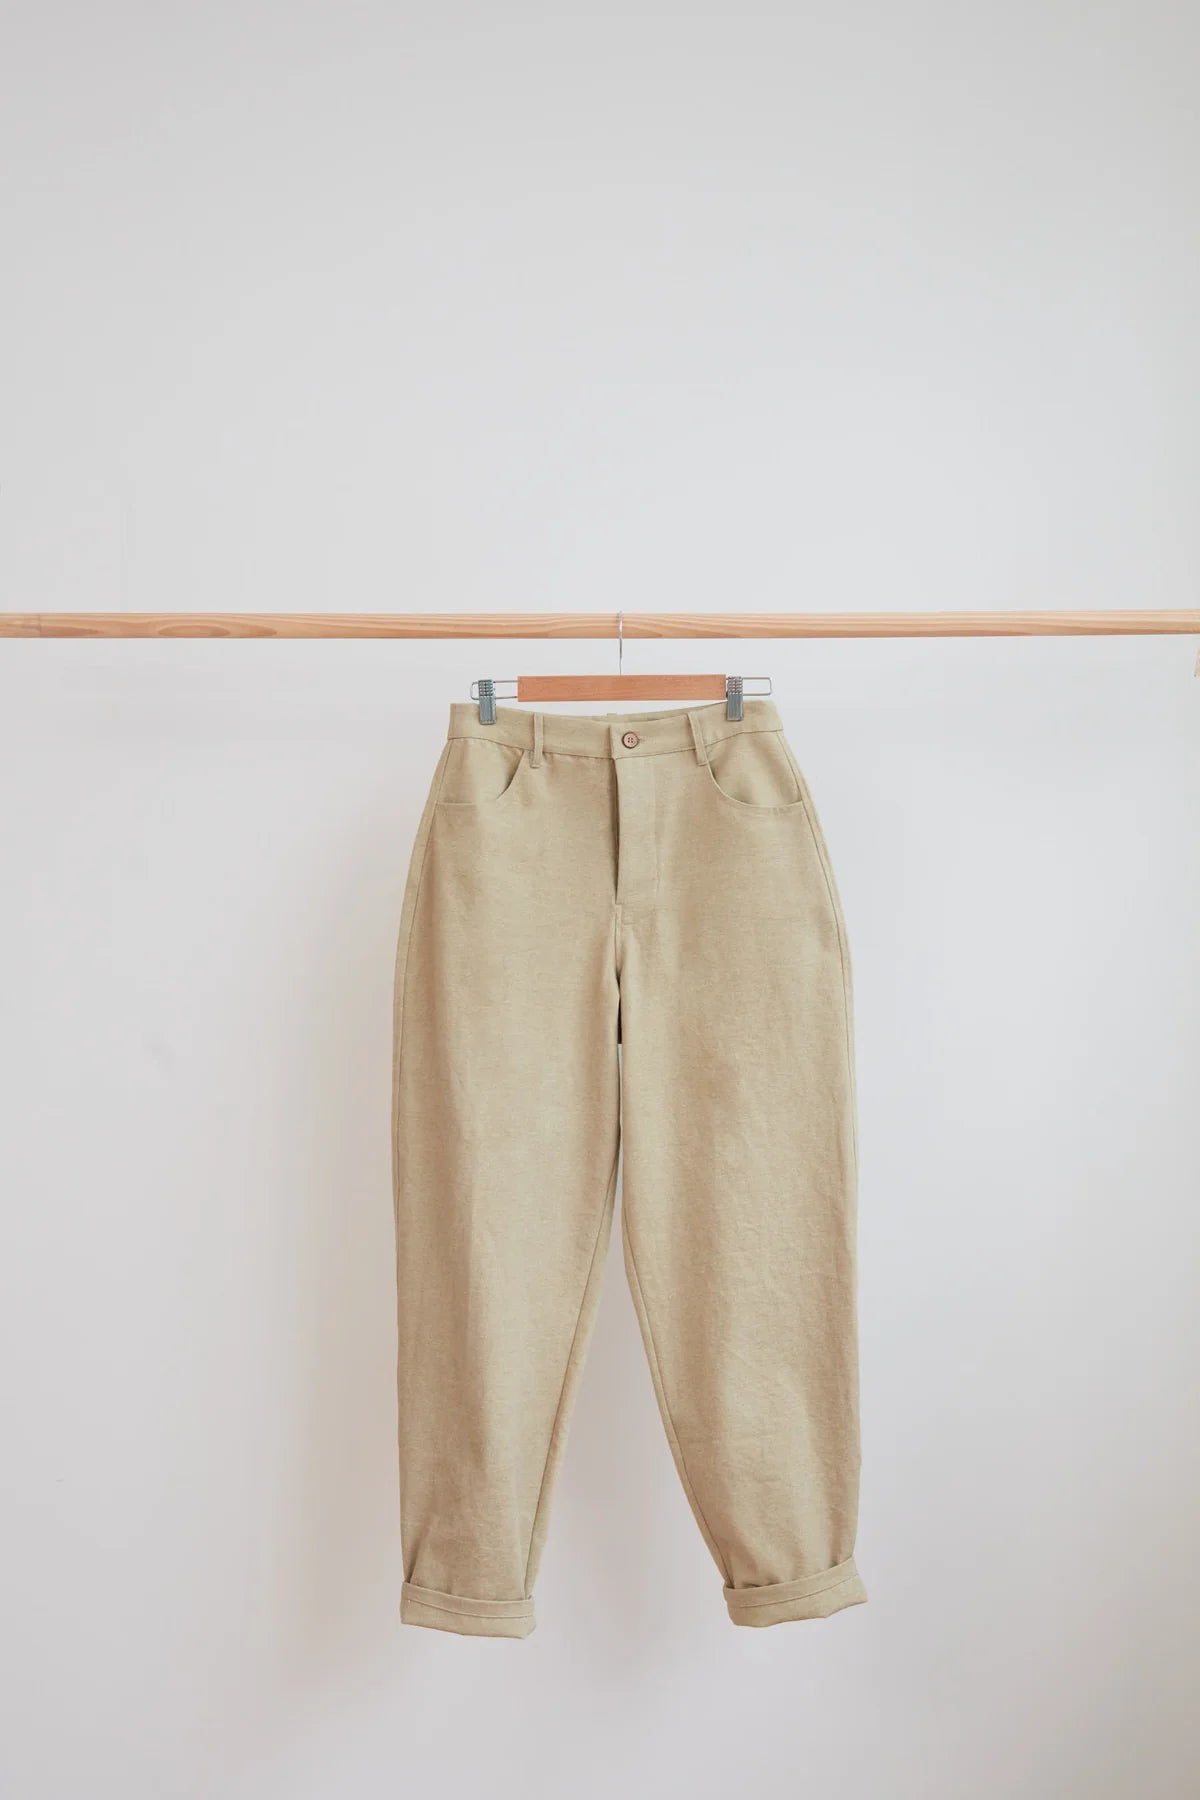 The Modern Sewing Co. Worker Trousers - PDF Pattern